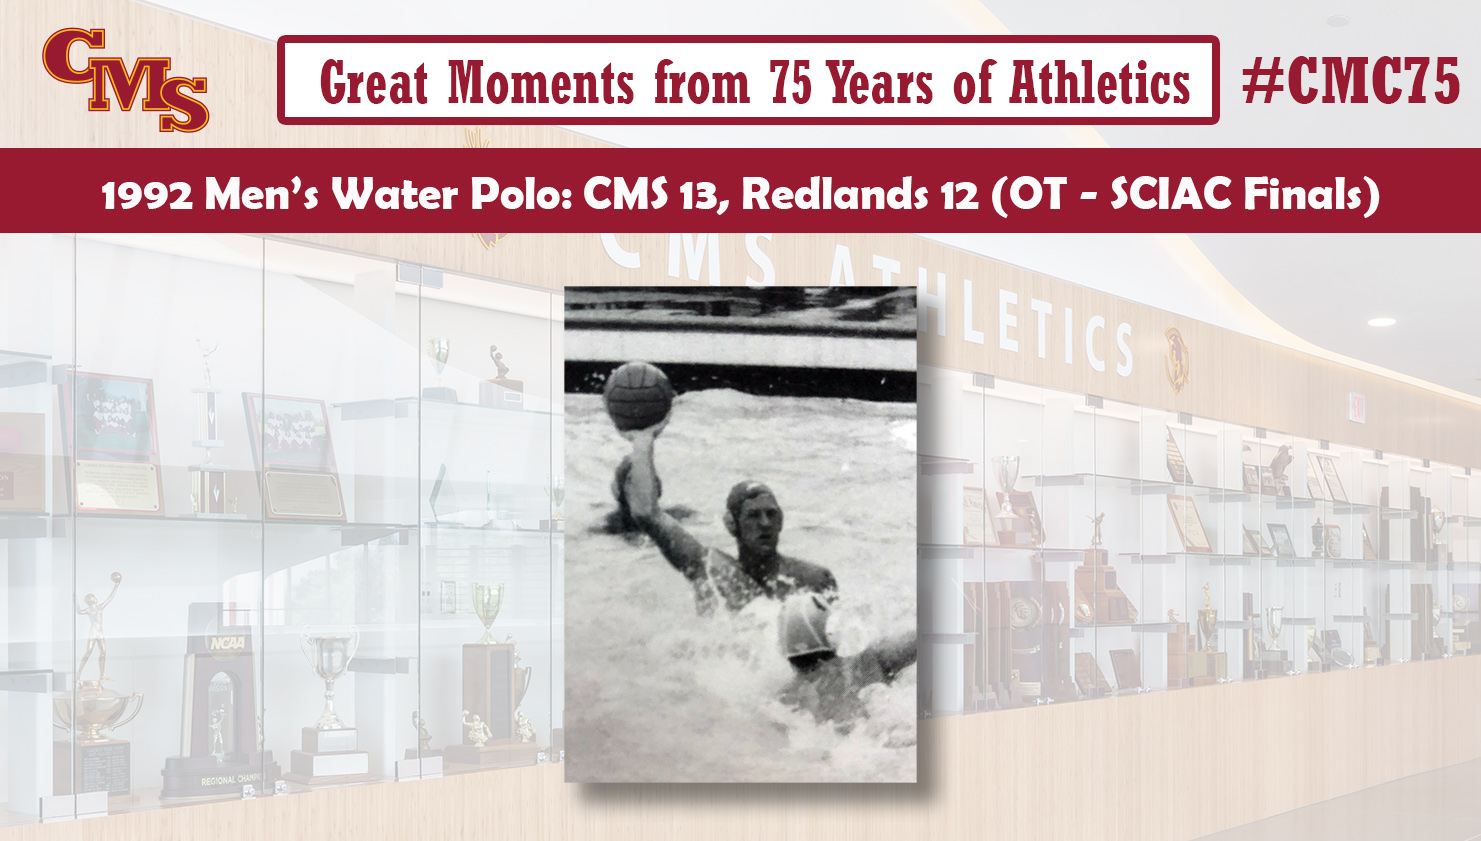 Gordon Bigler action shot. Words over the photo read: Great Moments from 75 Years of Athletics. 1992 Men's Water Polo: CMS 13, Redlands 12 (OT - SCIAC Finals)